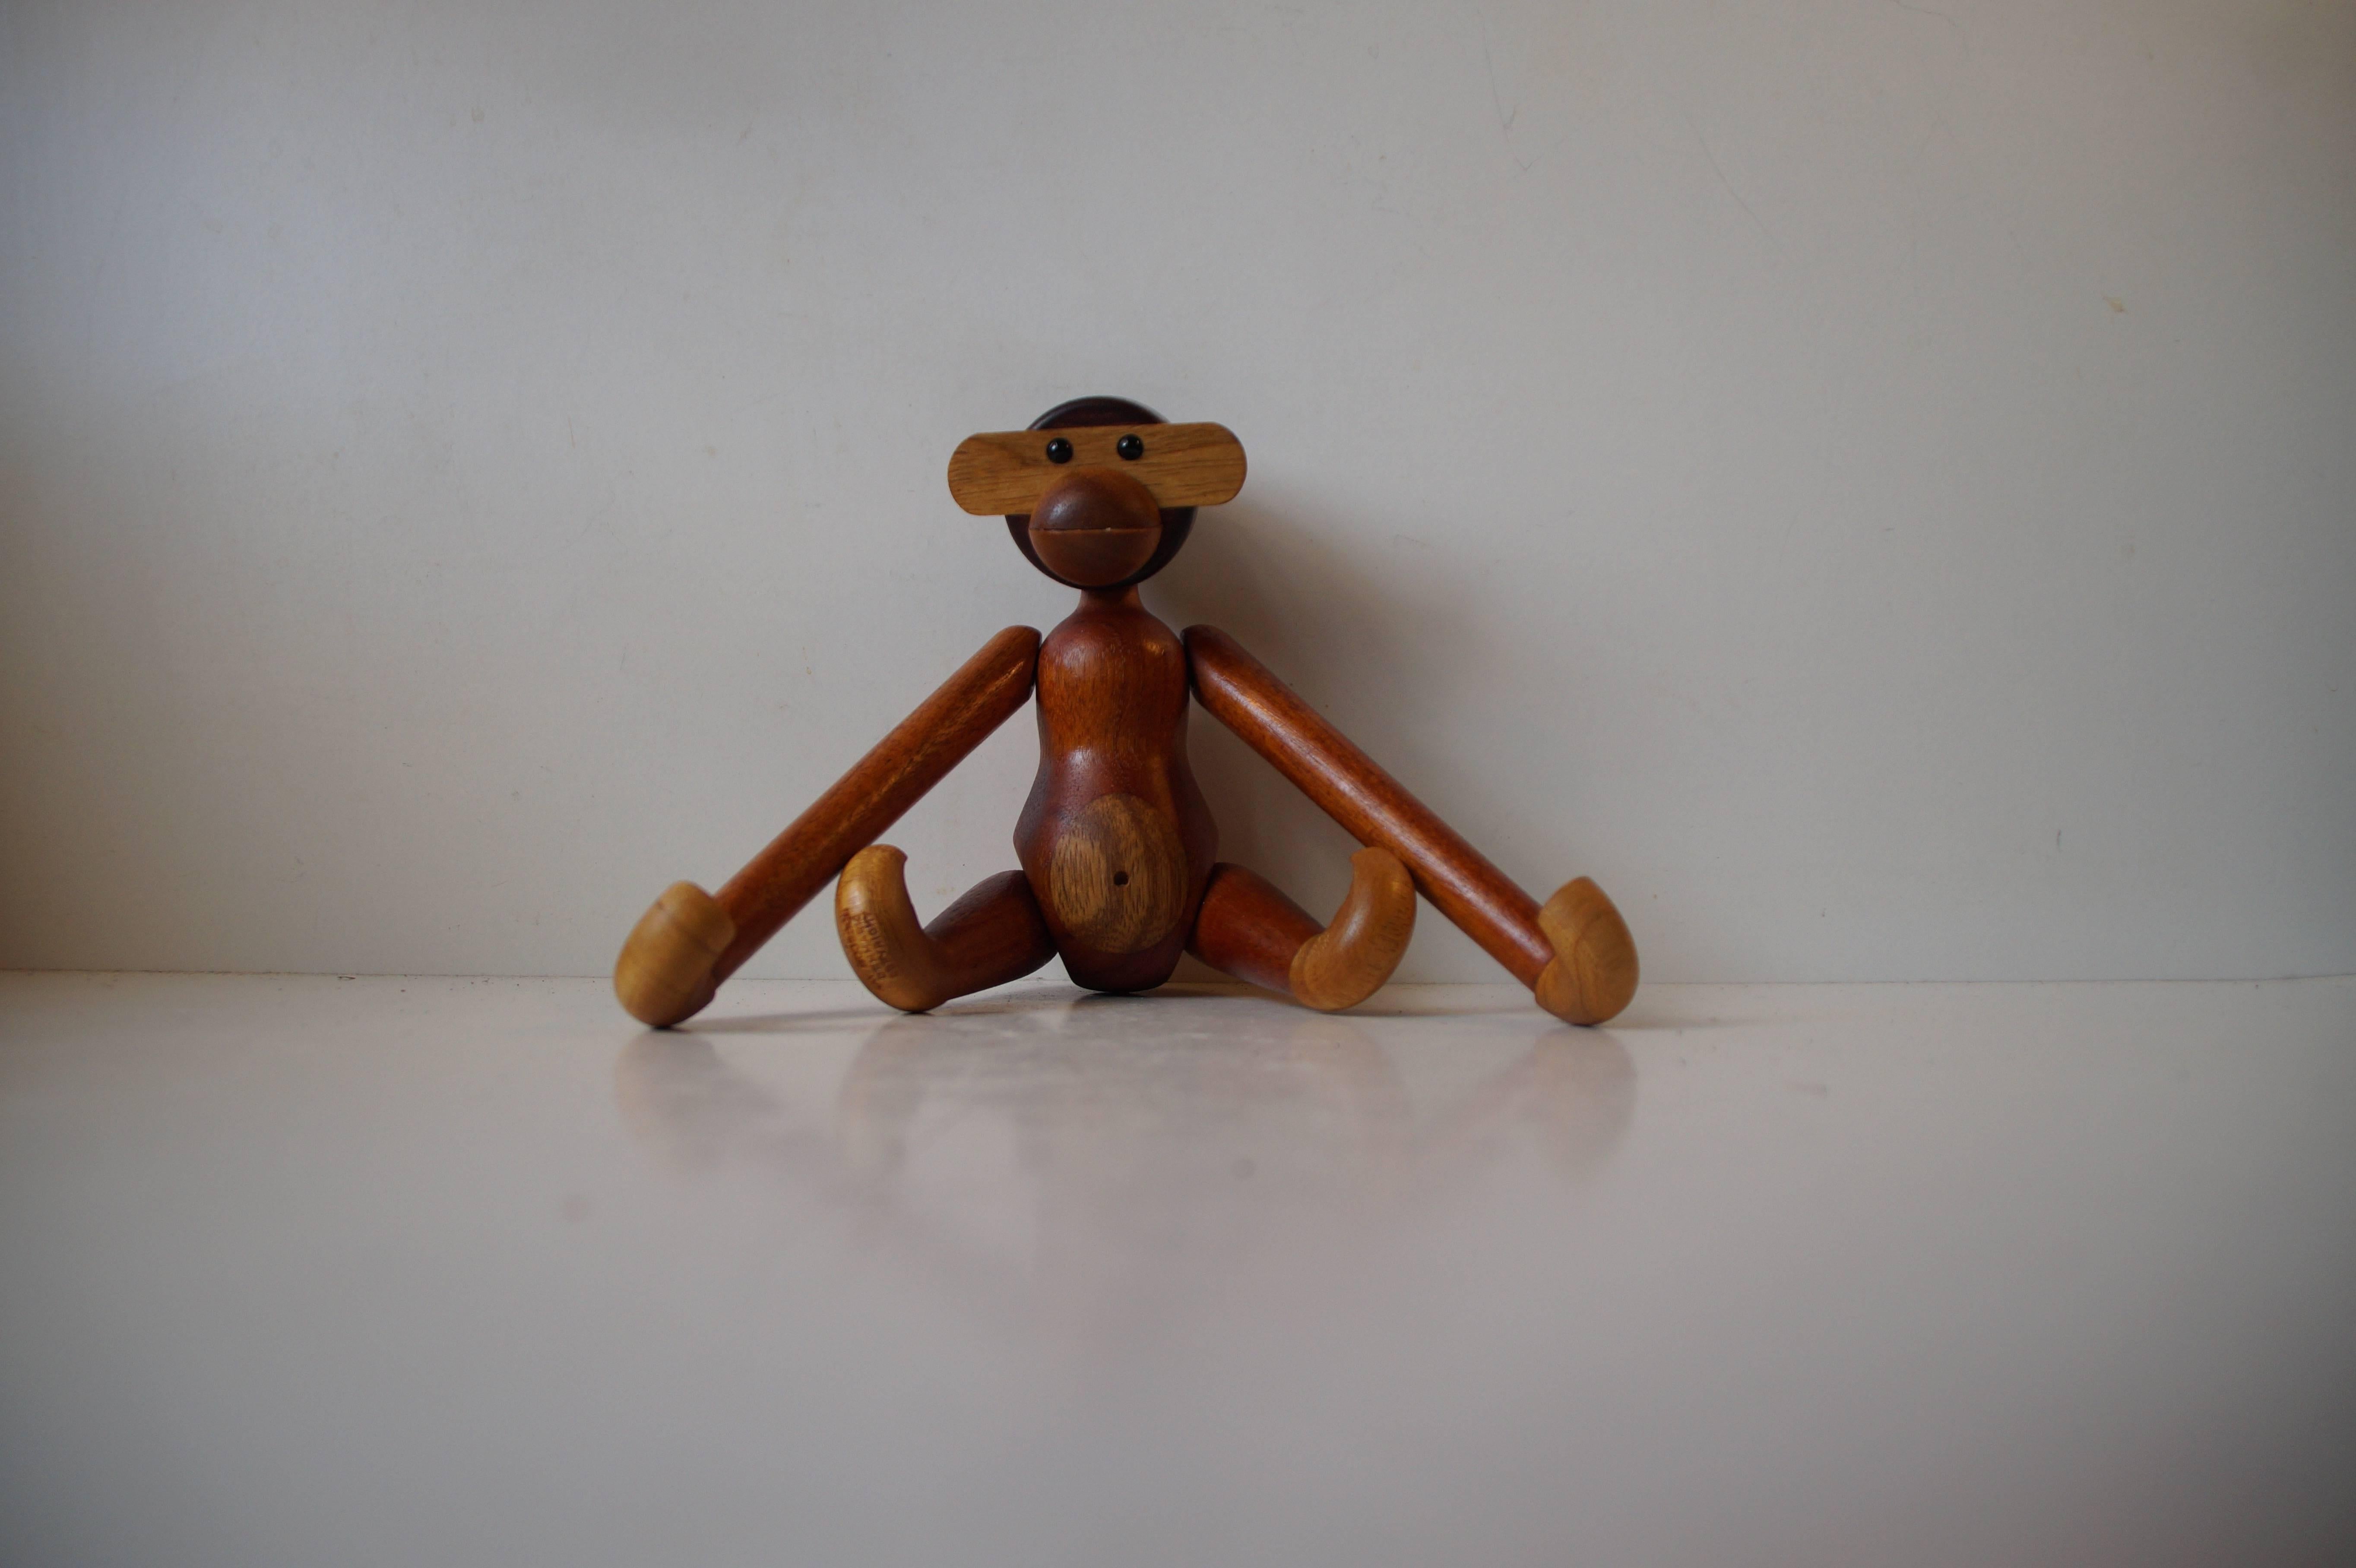 Mid-Century Modern Vintage Monkey by Kay Bojesen, Denmark 1960s, Articulated Limbs and Rich Patina